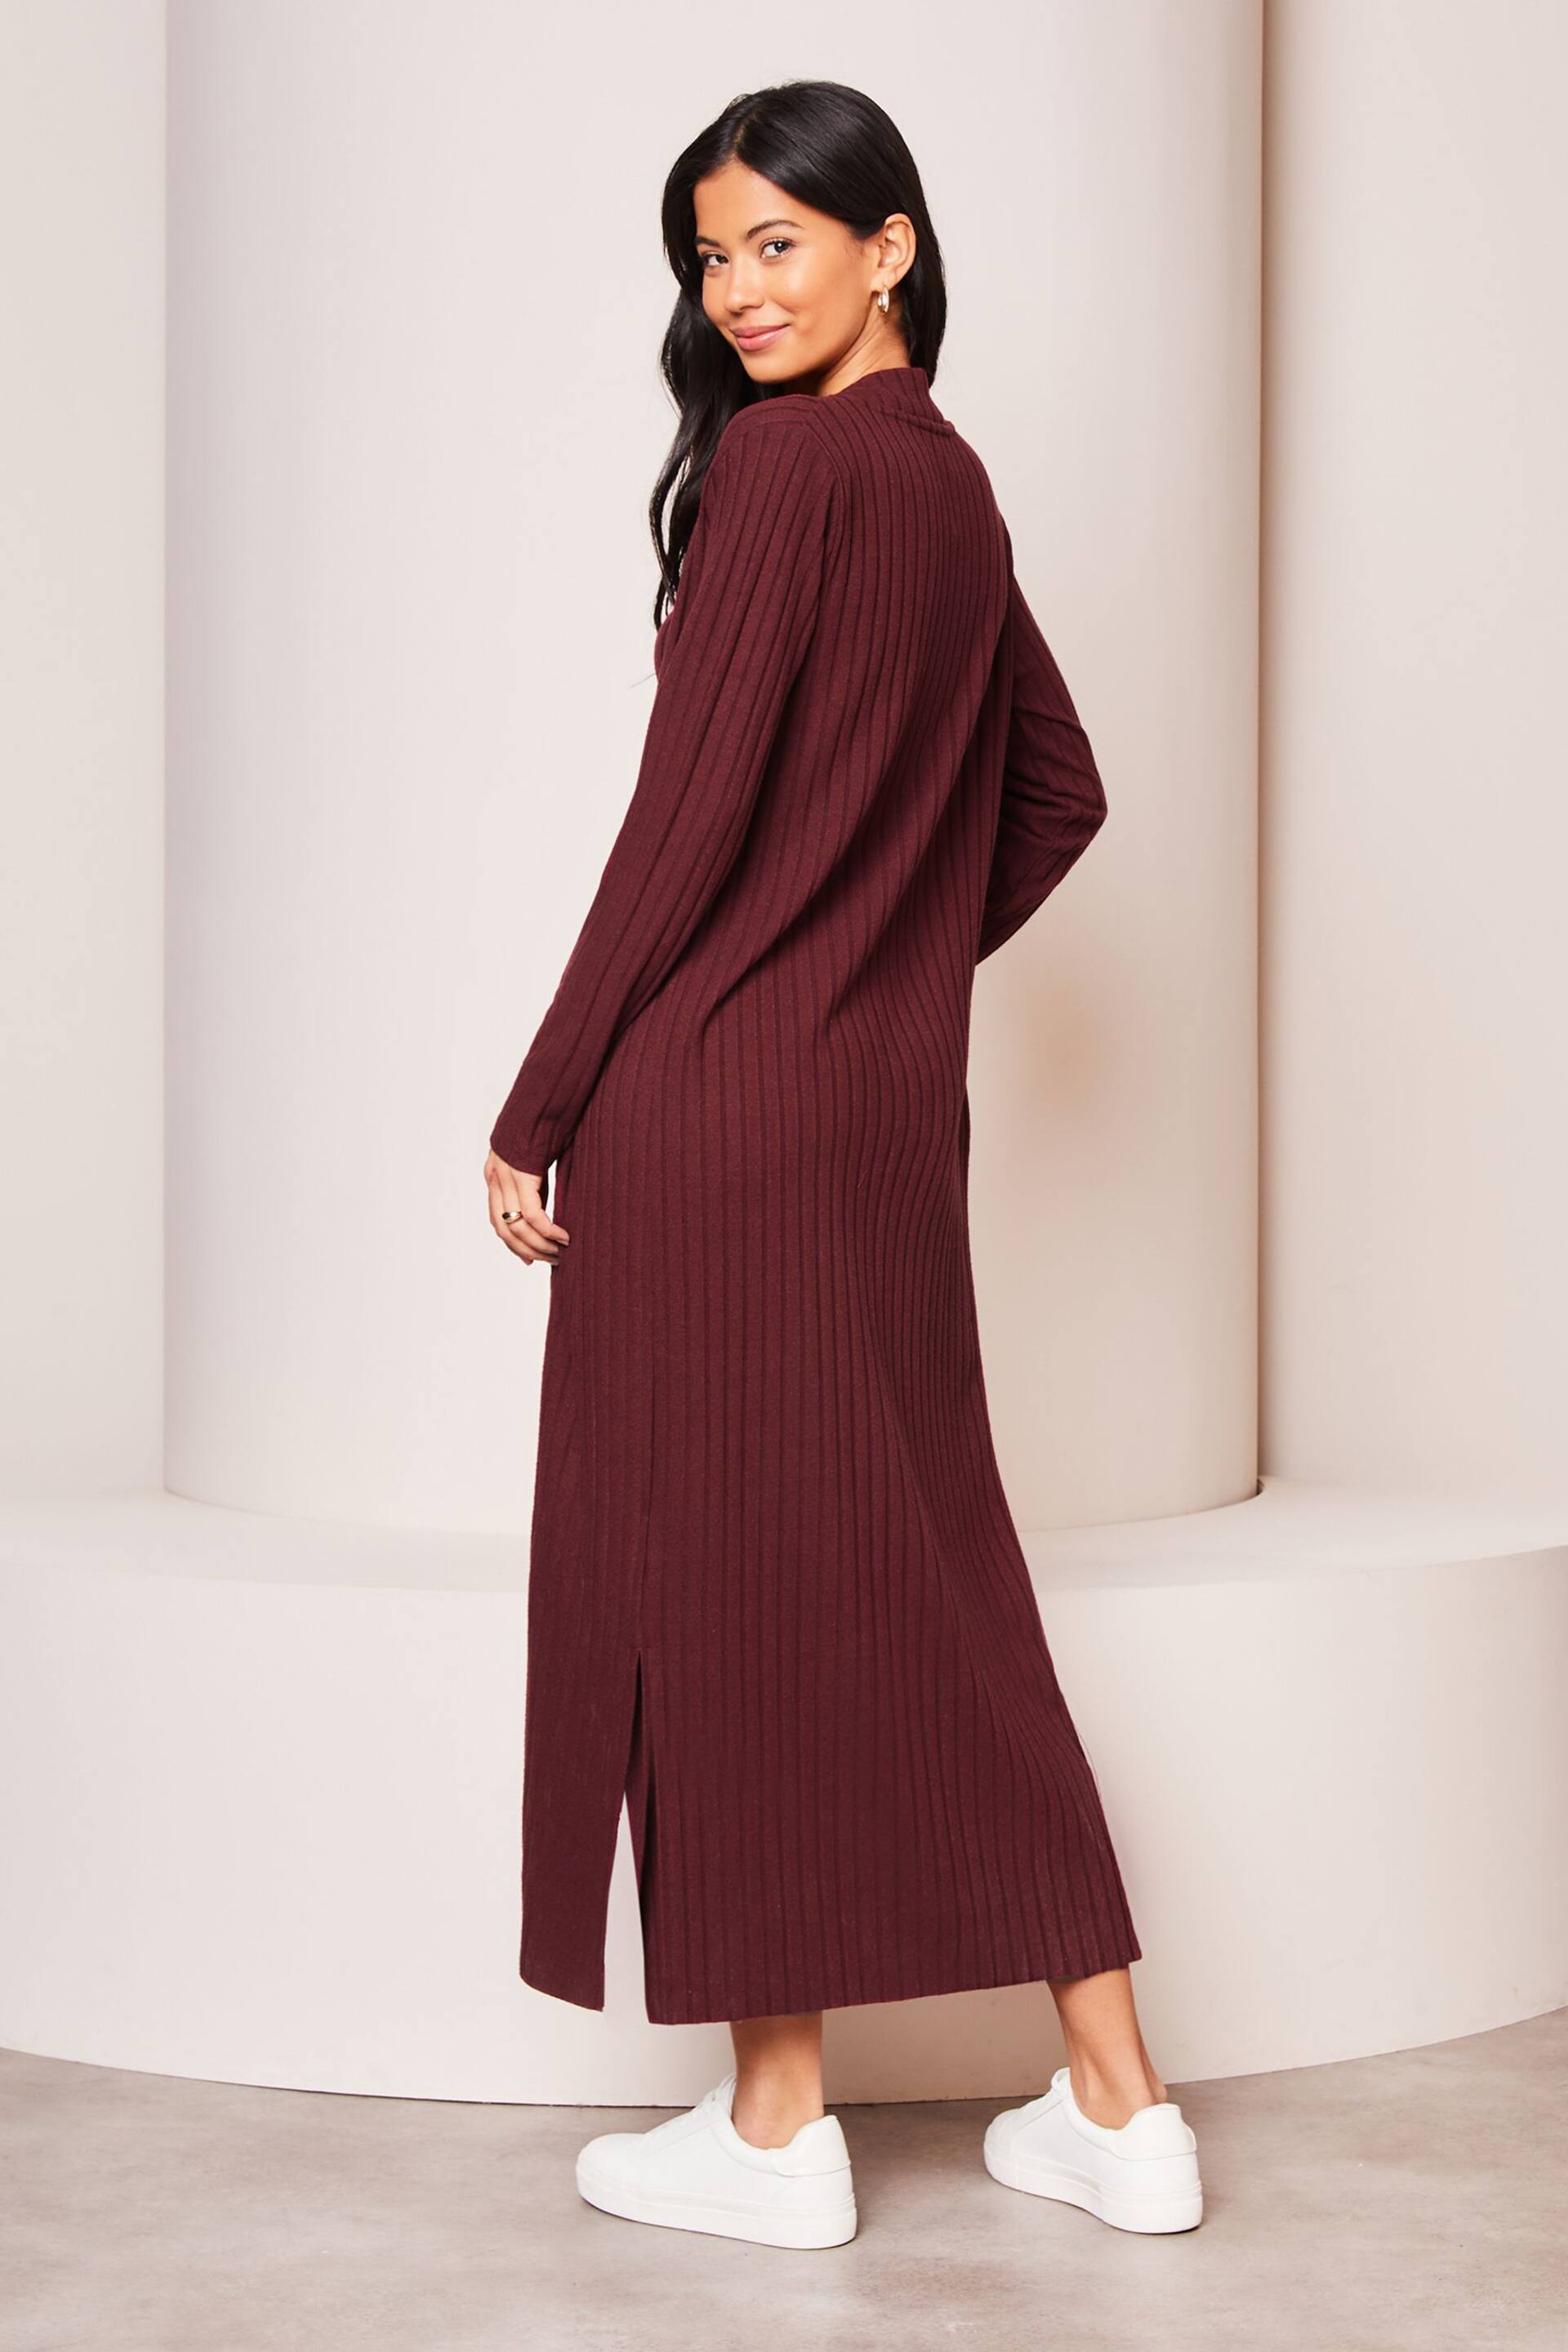 Lipsy Burgundy Red Red Long Sleeve Ribbed Cosy Longline Cardigan - Image 2 of 4